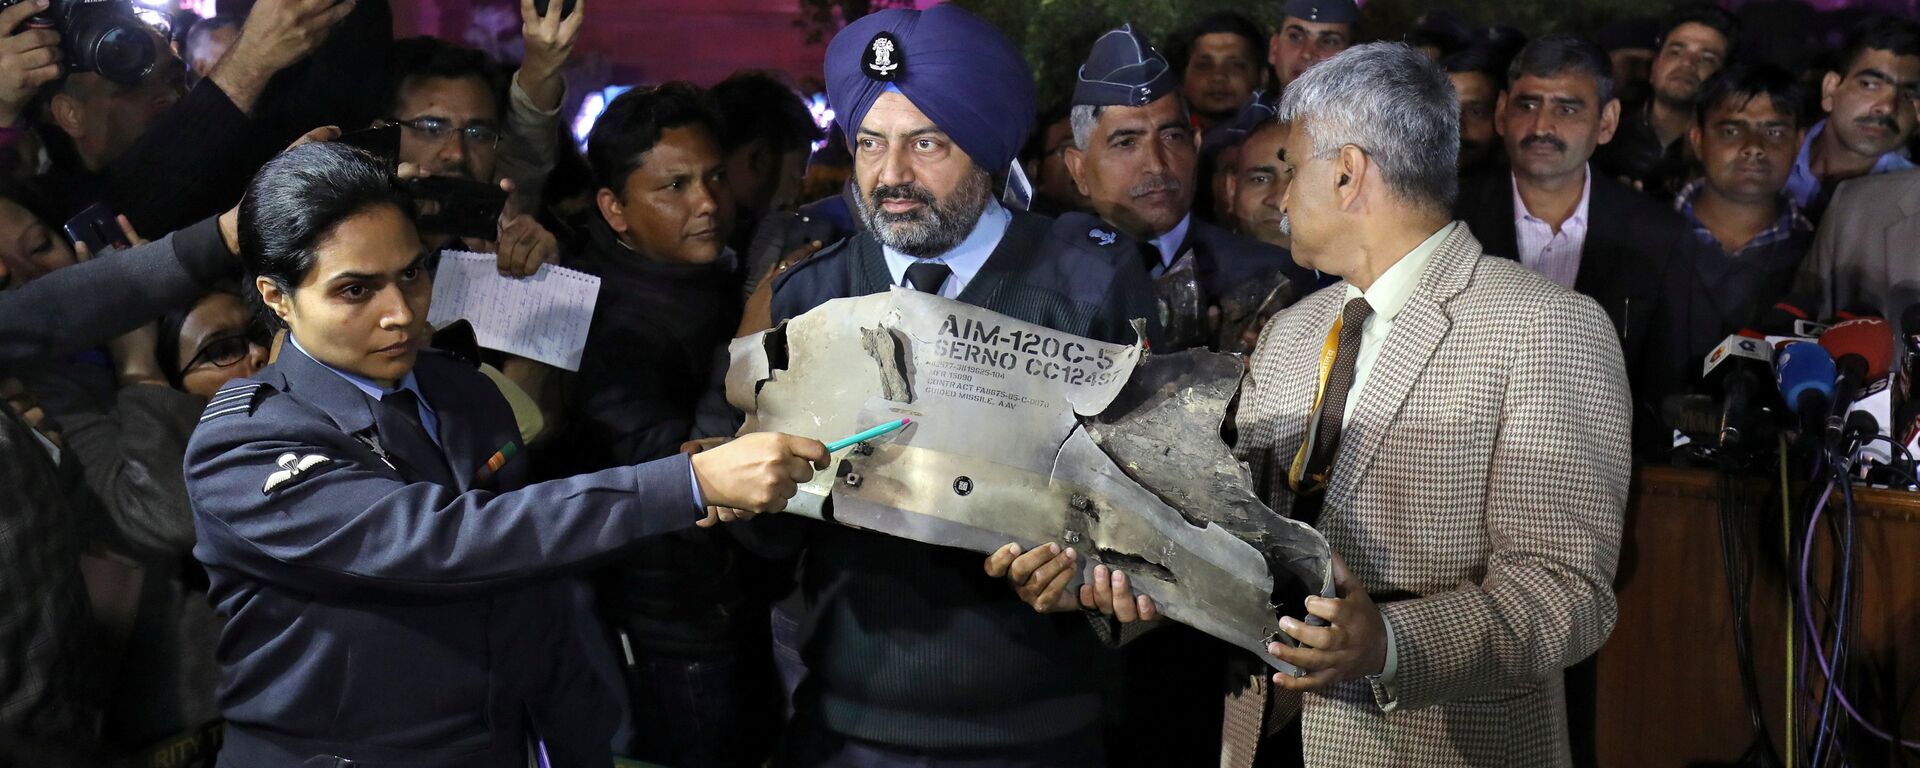 Indian Air Force officials display a wreckage of AMRAAM air-to-air missile that they say was fired by Pakistan Air Force fighter jet during a strike over Kashmir on Wednesday, after speaking with the media in the lawns of India's Defence Ministry in New Delhi, India, February 28, 2019 - Sputnik International, 1920, 01.03.2019